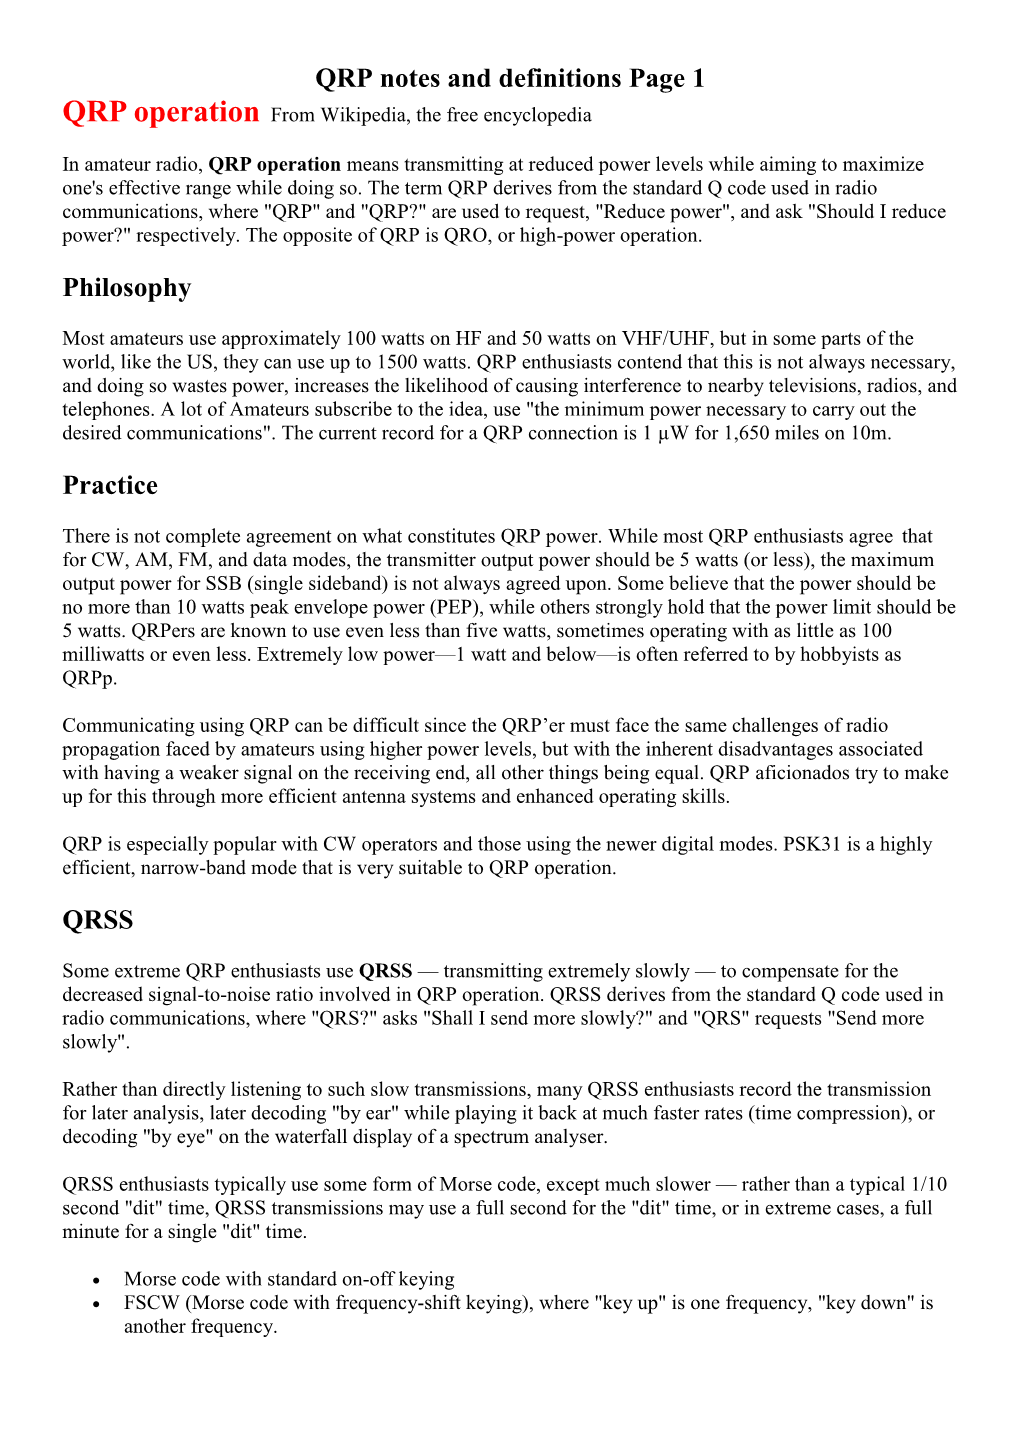 QRP Notes and Definitions Page 1 Philosophy Practice QRSS